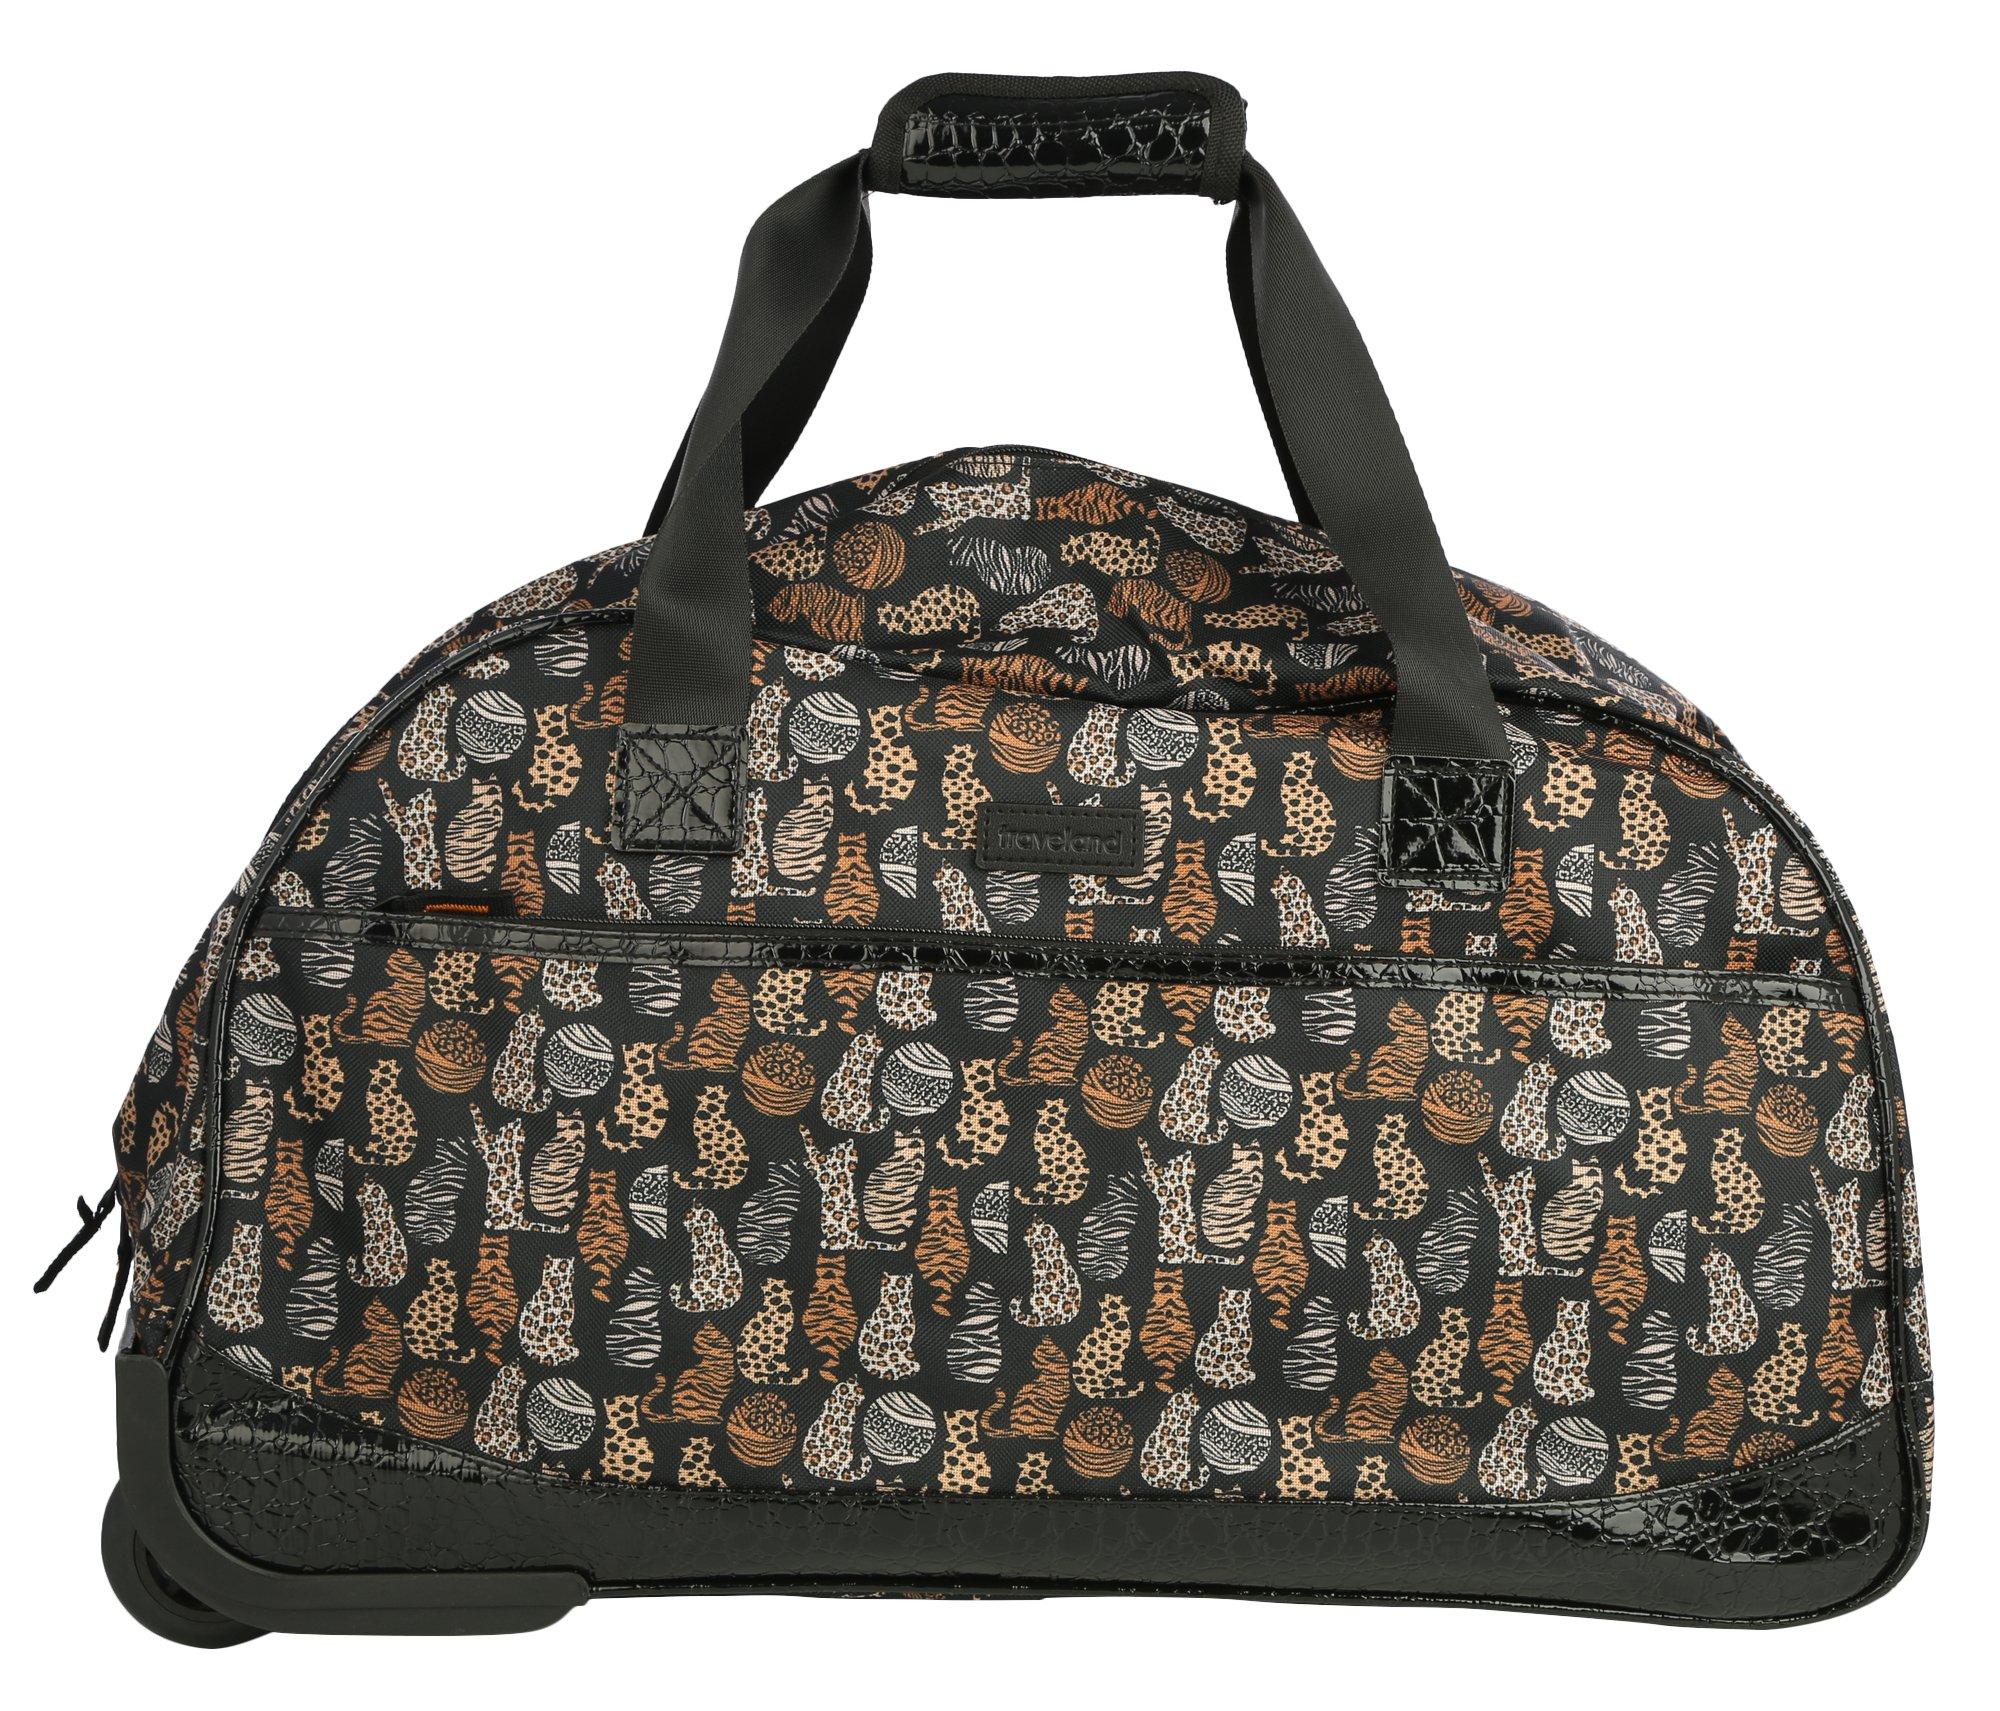 Cat Print Carry-On Duffle